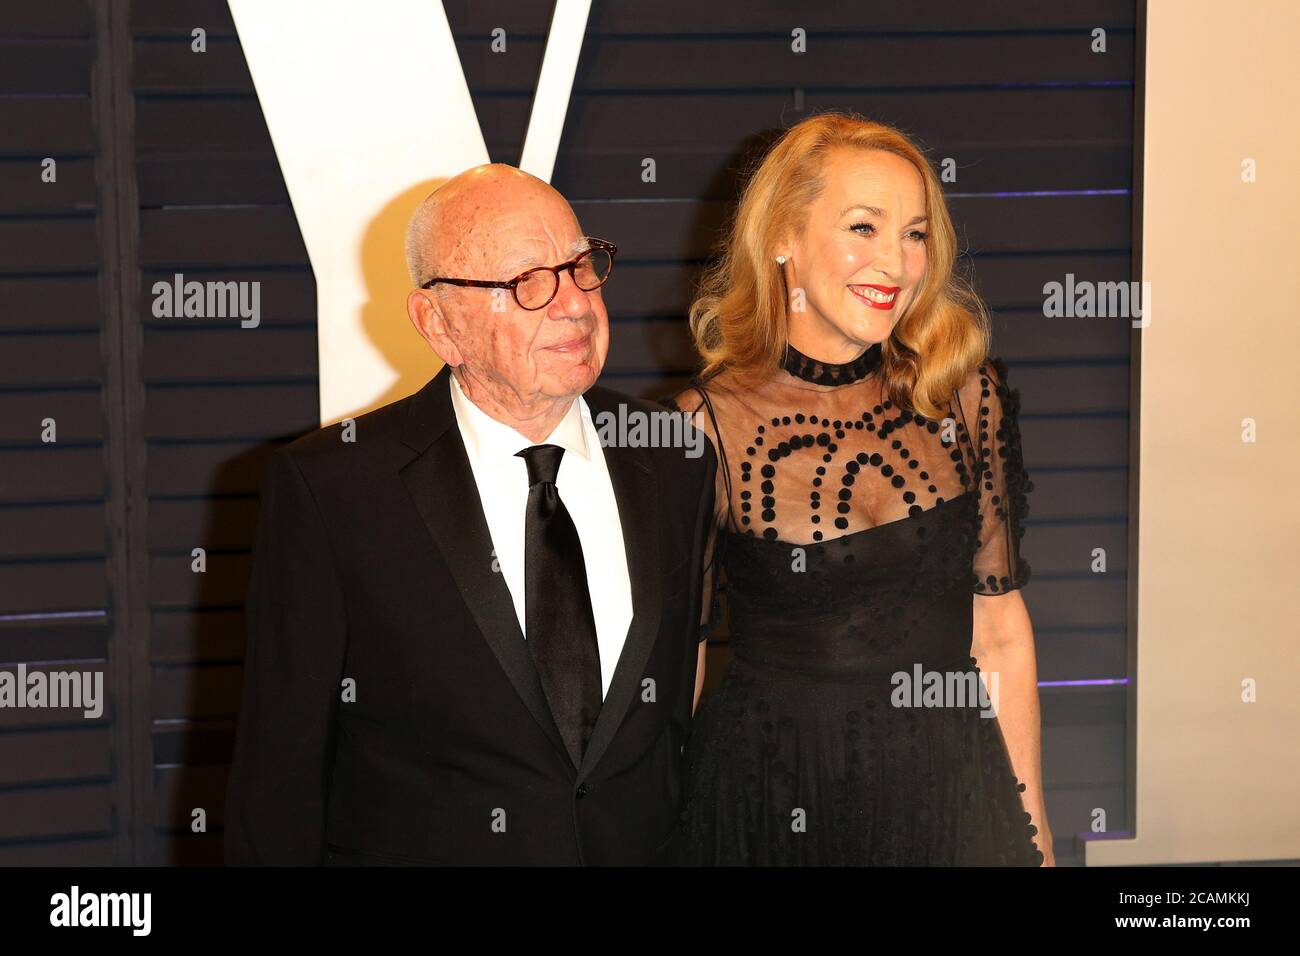 LOS ANGELES - FEB 24:  Rupert Murdoch, Jerry Hall at the 2019 Vanity Fair Oscar Party on the Wallis Annenberg Center for the Performing Arts on February 24, 2019 in Beverly Hills, CA Stock Photo